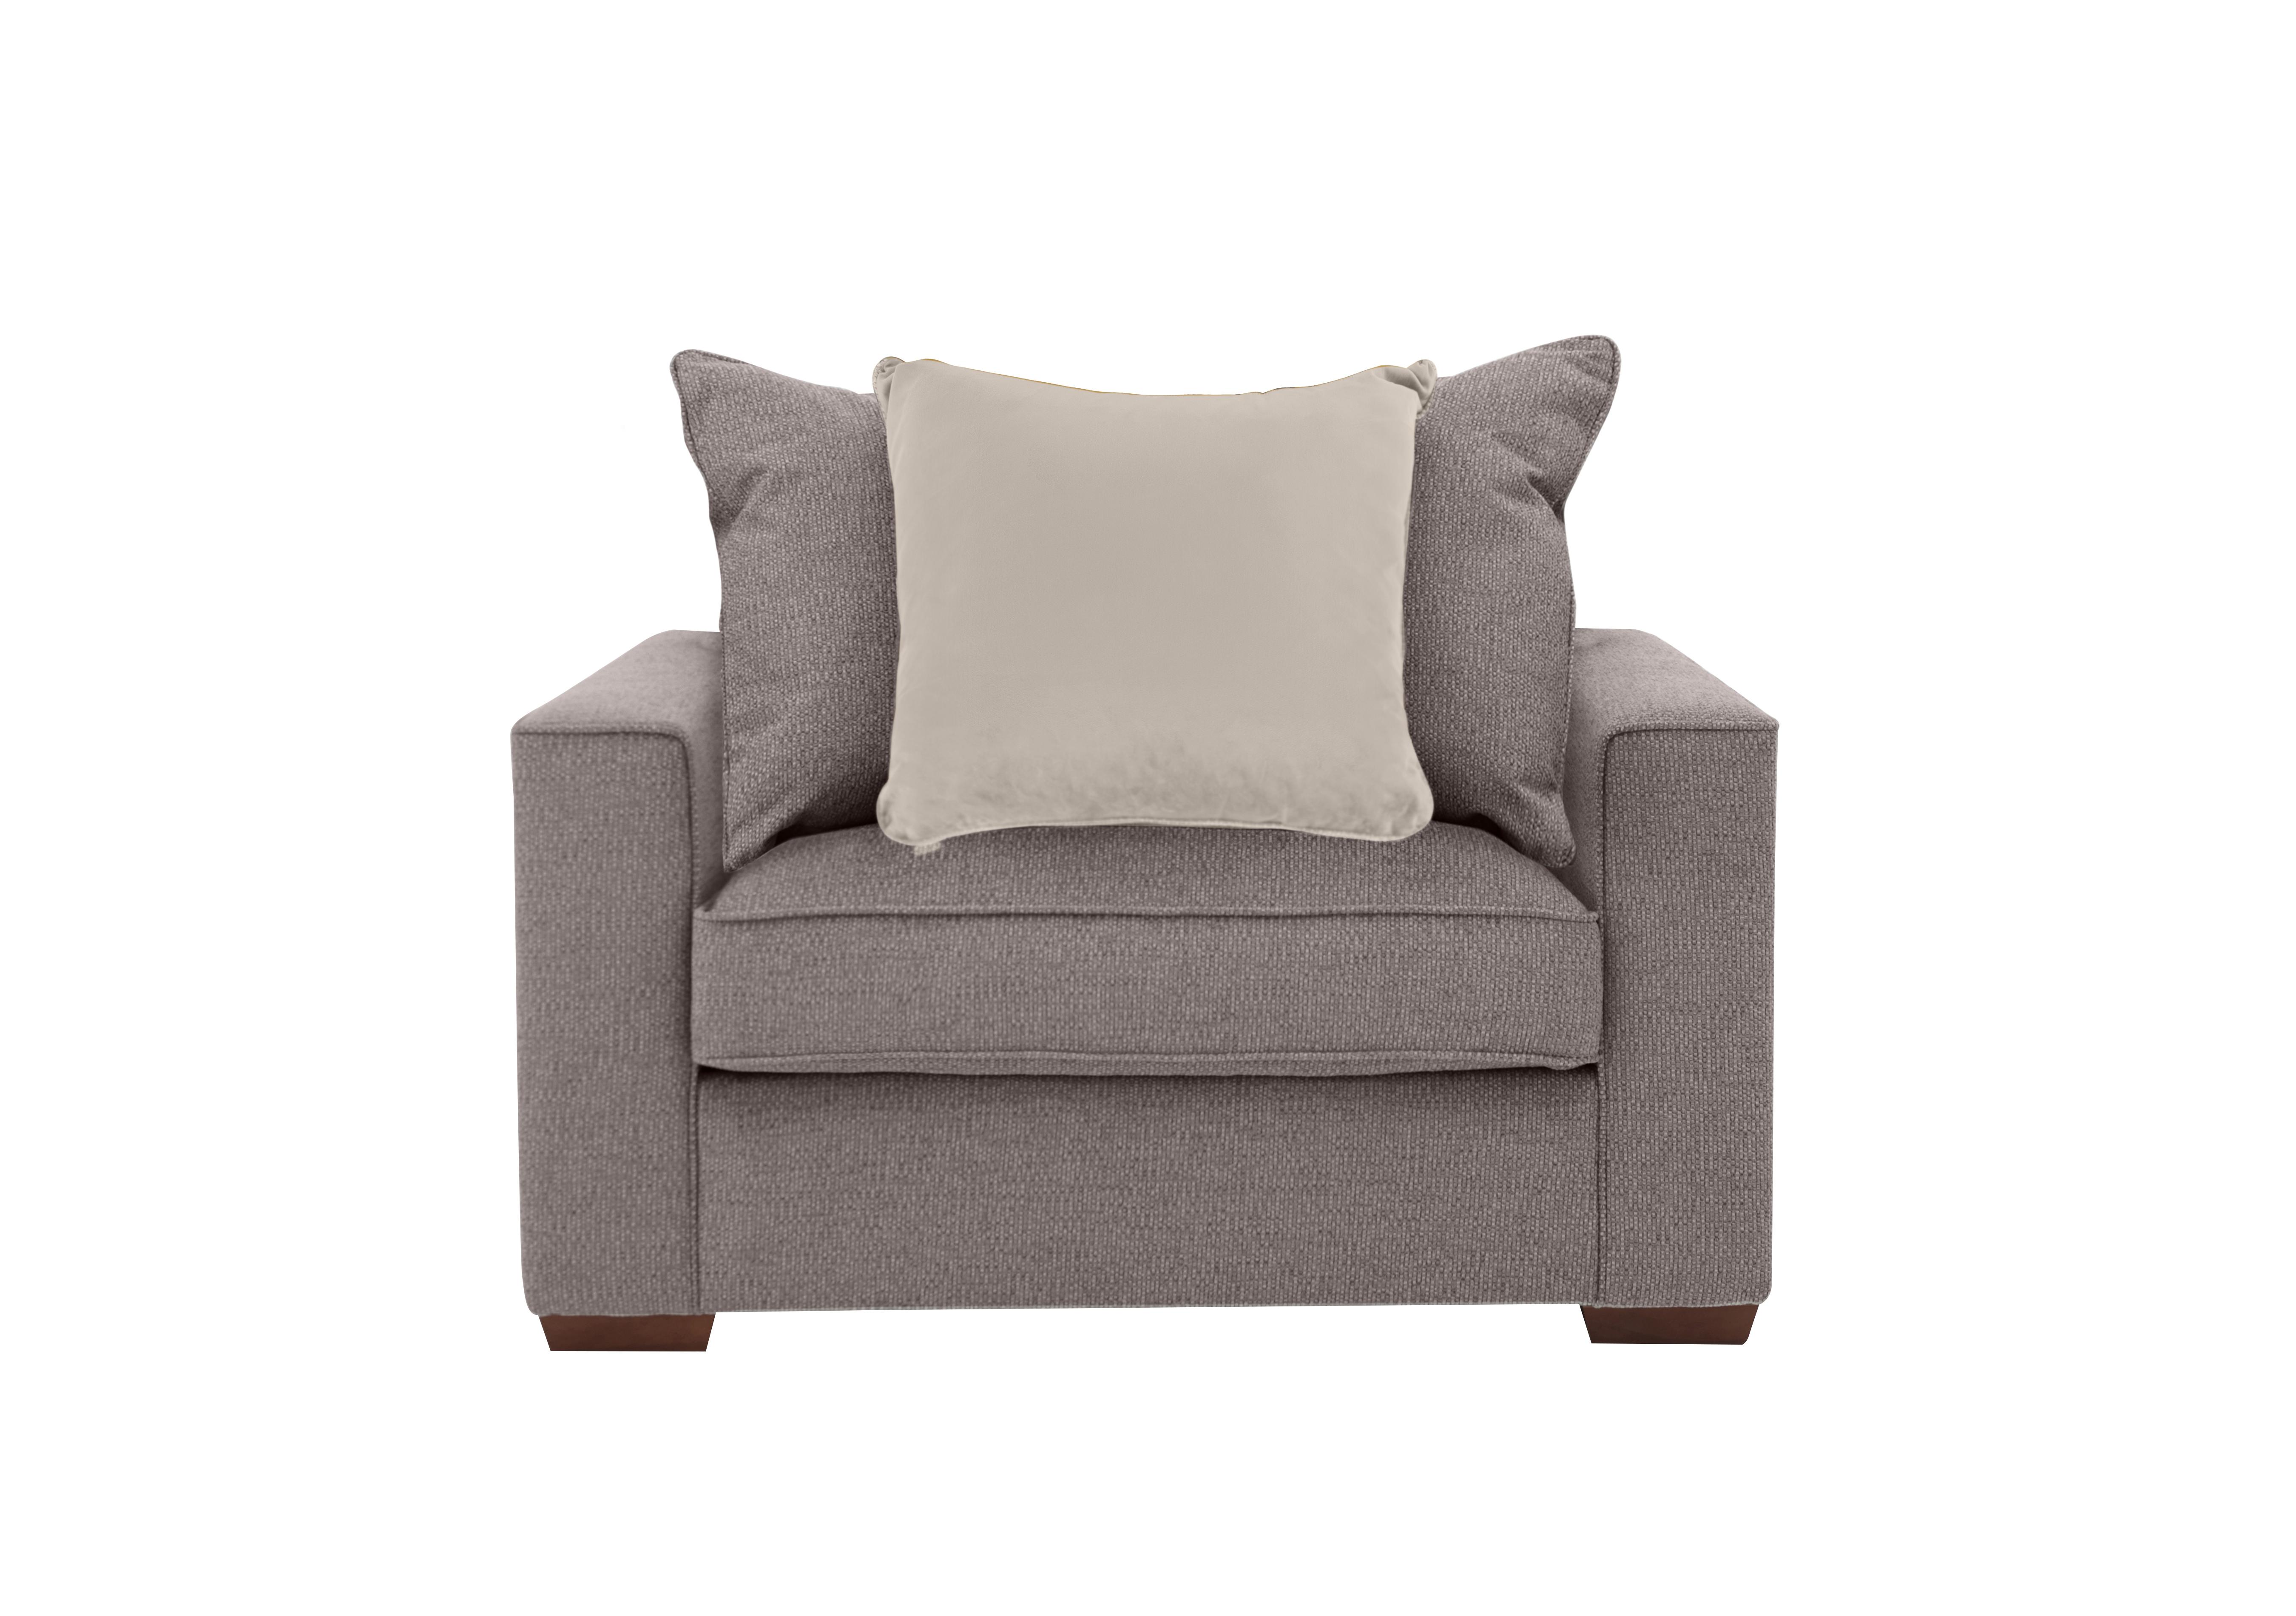 Cory Fabric Scatter Back Chair Bed in Dallas Taupe Taupe Pack on Furniture Village